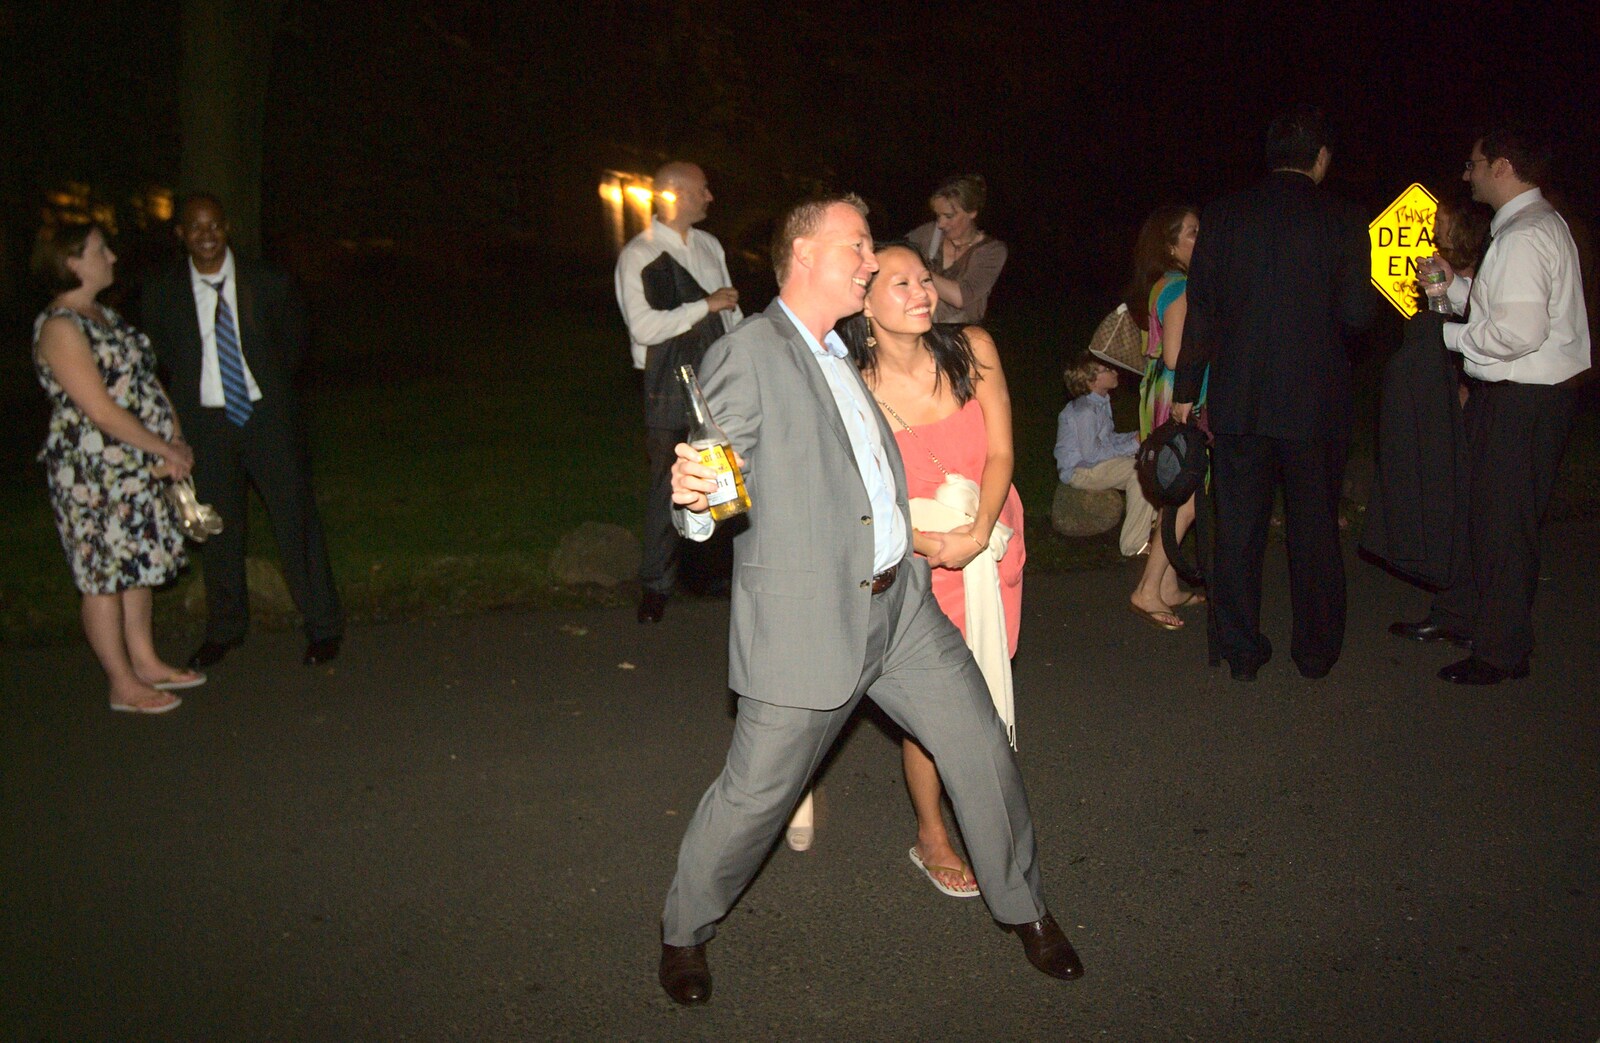 More dancing on the drive from Phil and Tania's Wedding, Short Hills, New Jersey, USA - 20th August 2011